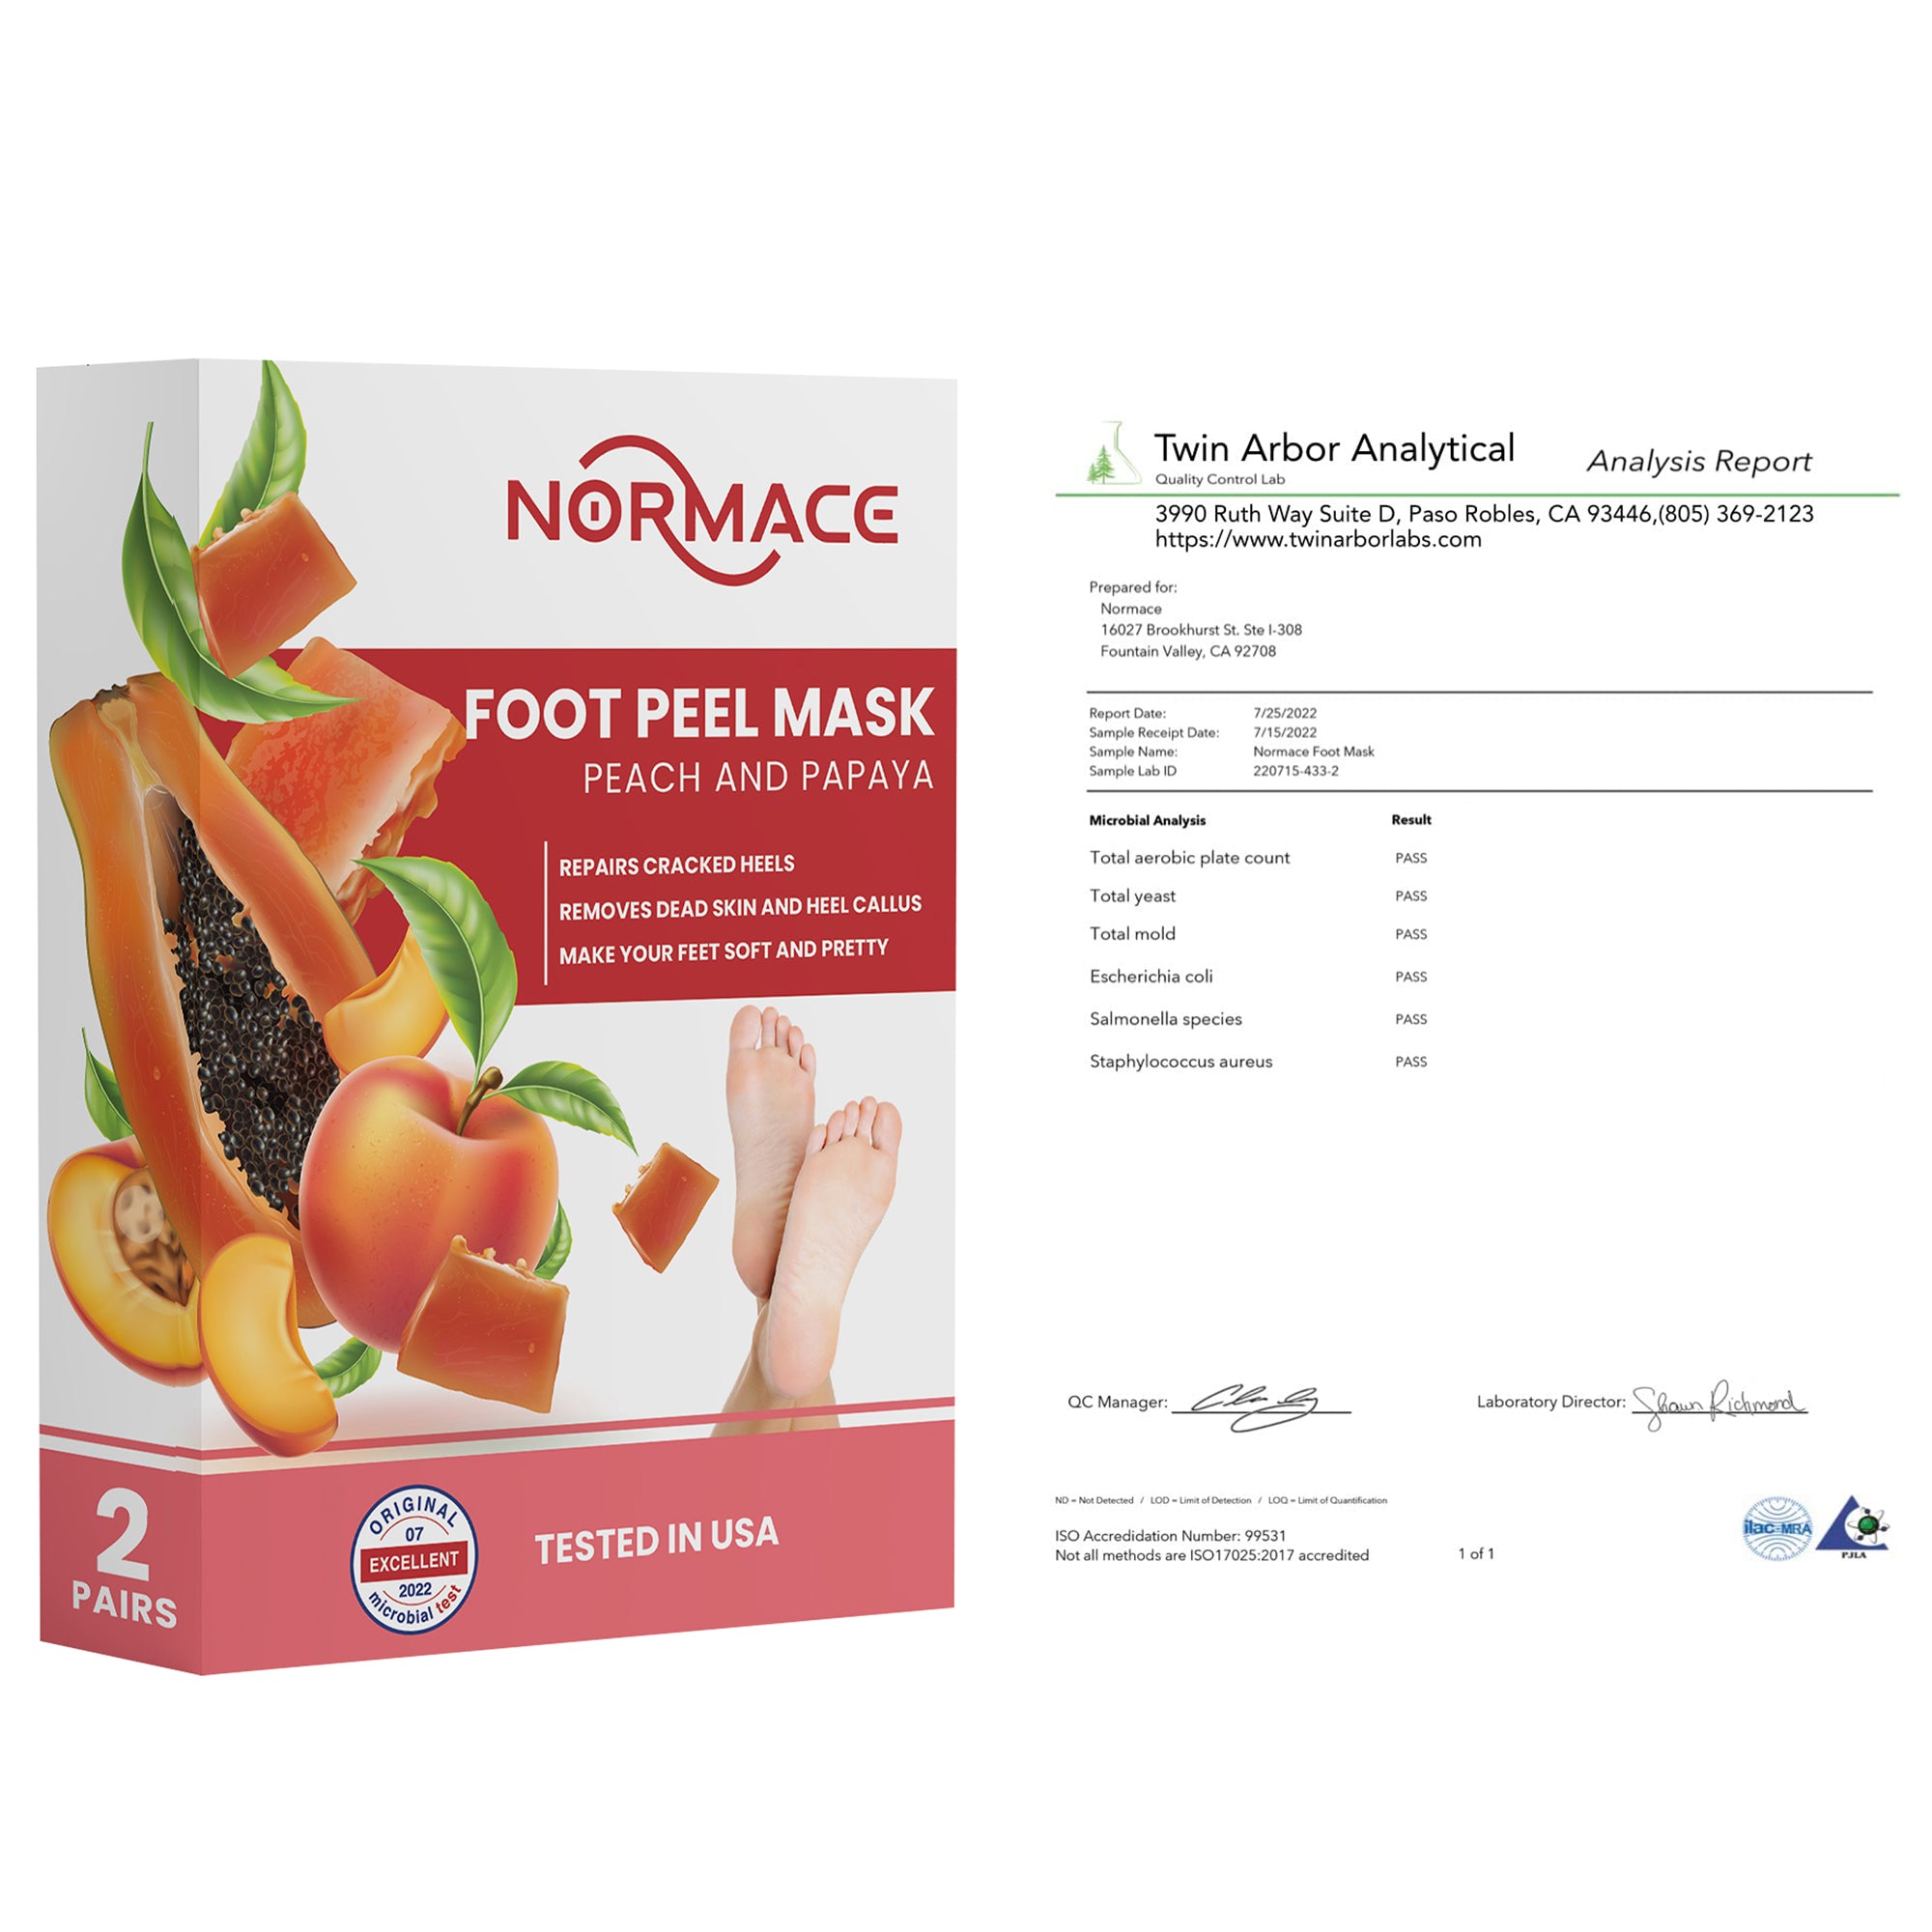 Foot Peel Mask with Peach and Papaya by Normace- 2 Pairs Exfoliating Foot Mask Microbial Tested for Dry, Cracked Feet, Callus & removing dead dry skin for soft baby feet.